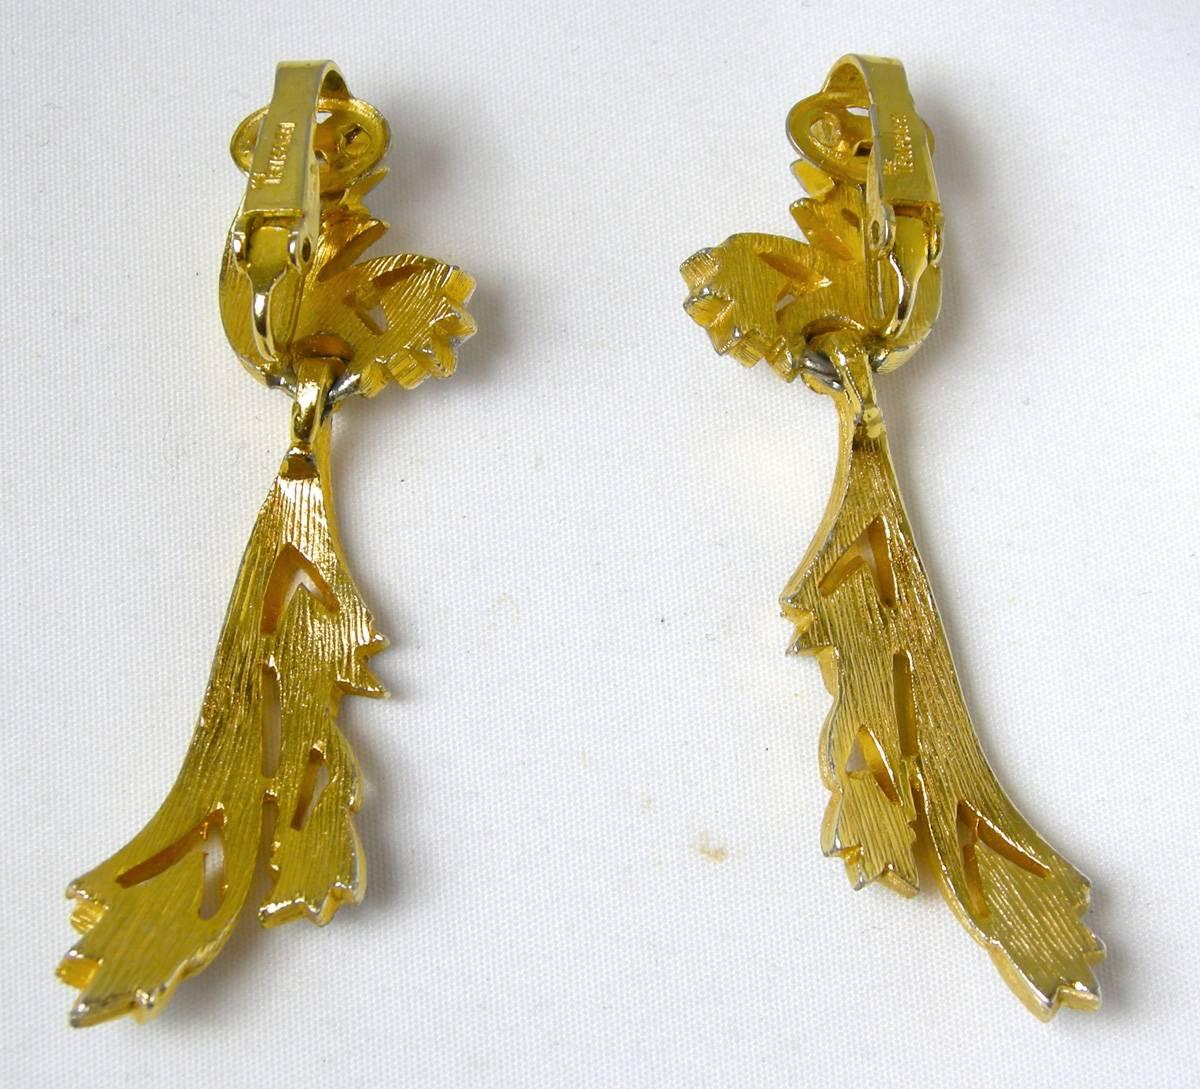 This is a stunning pair of vintage signed 1960’s clip Trifari hallmarked with the crown over the “T”.  They feature 5 delicate crystal leaves hanging down and embedded in a gold florentine metal finish. They are signed “Trifari” and measure 2-1/4” x